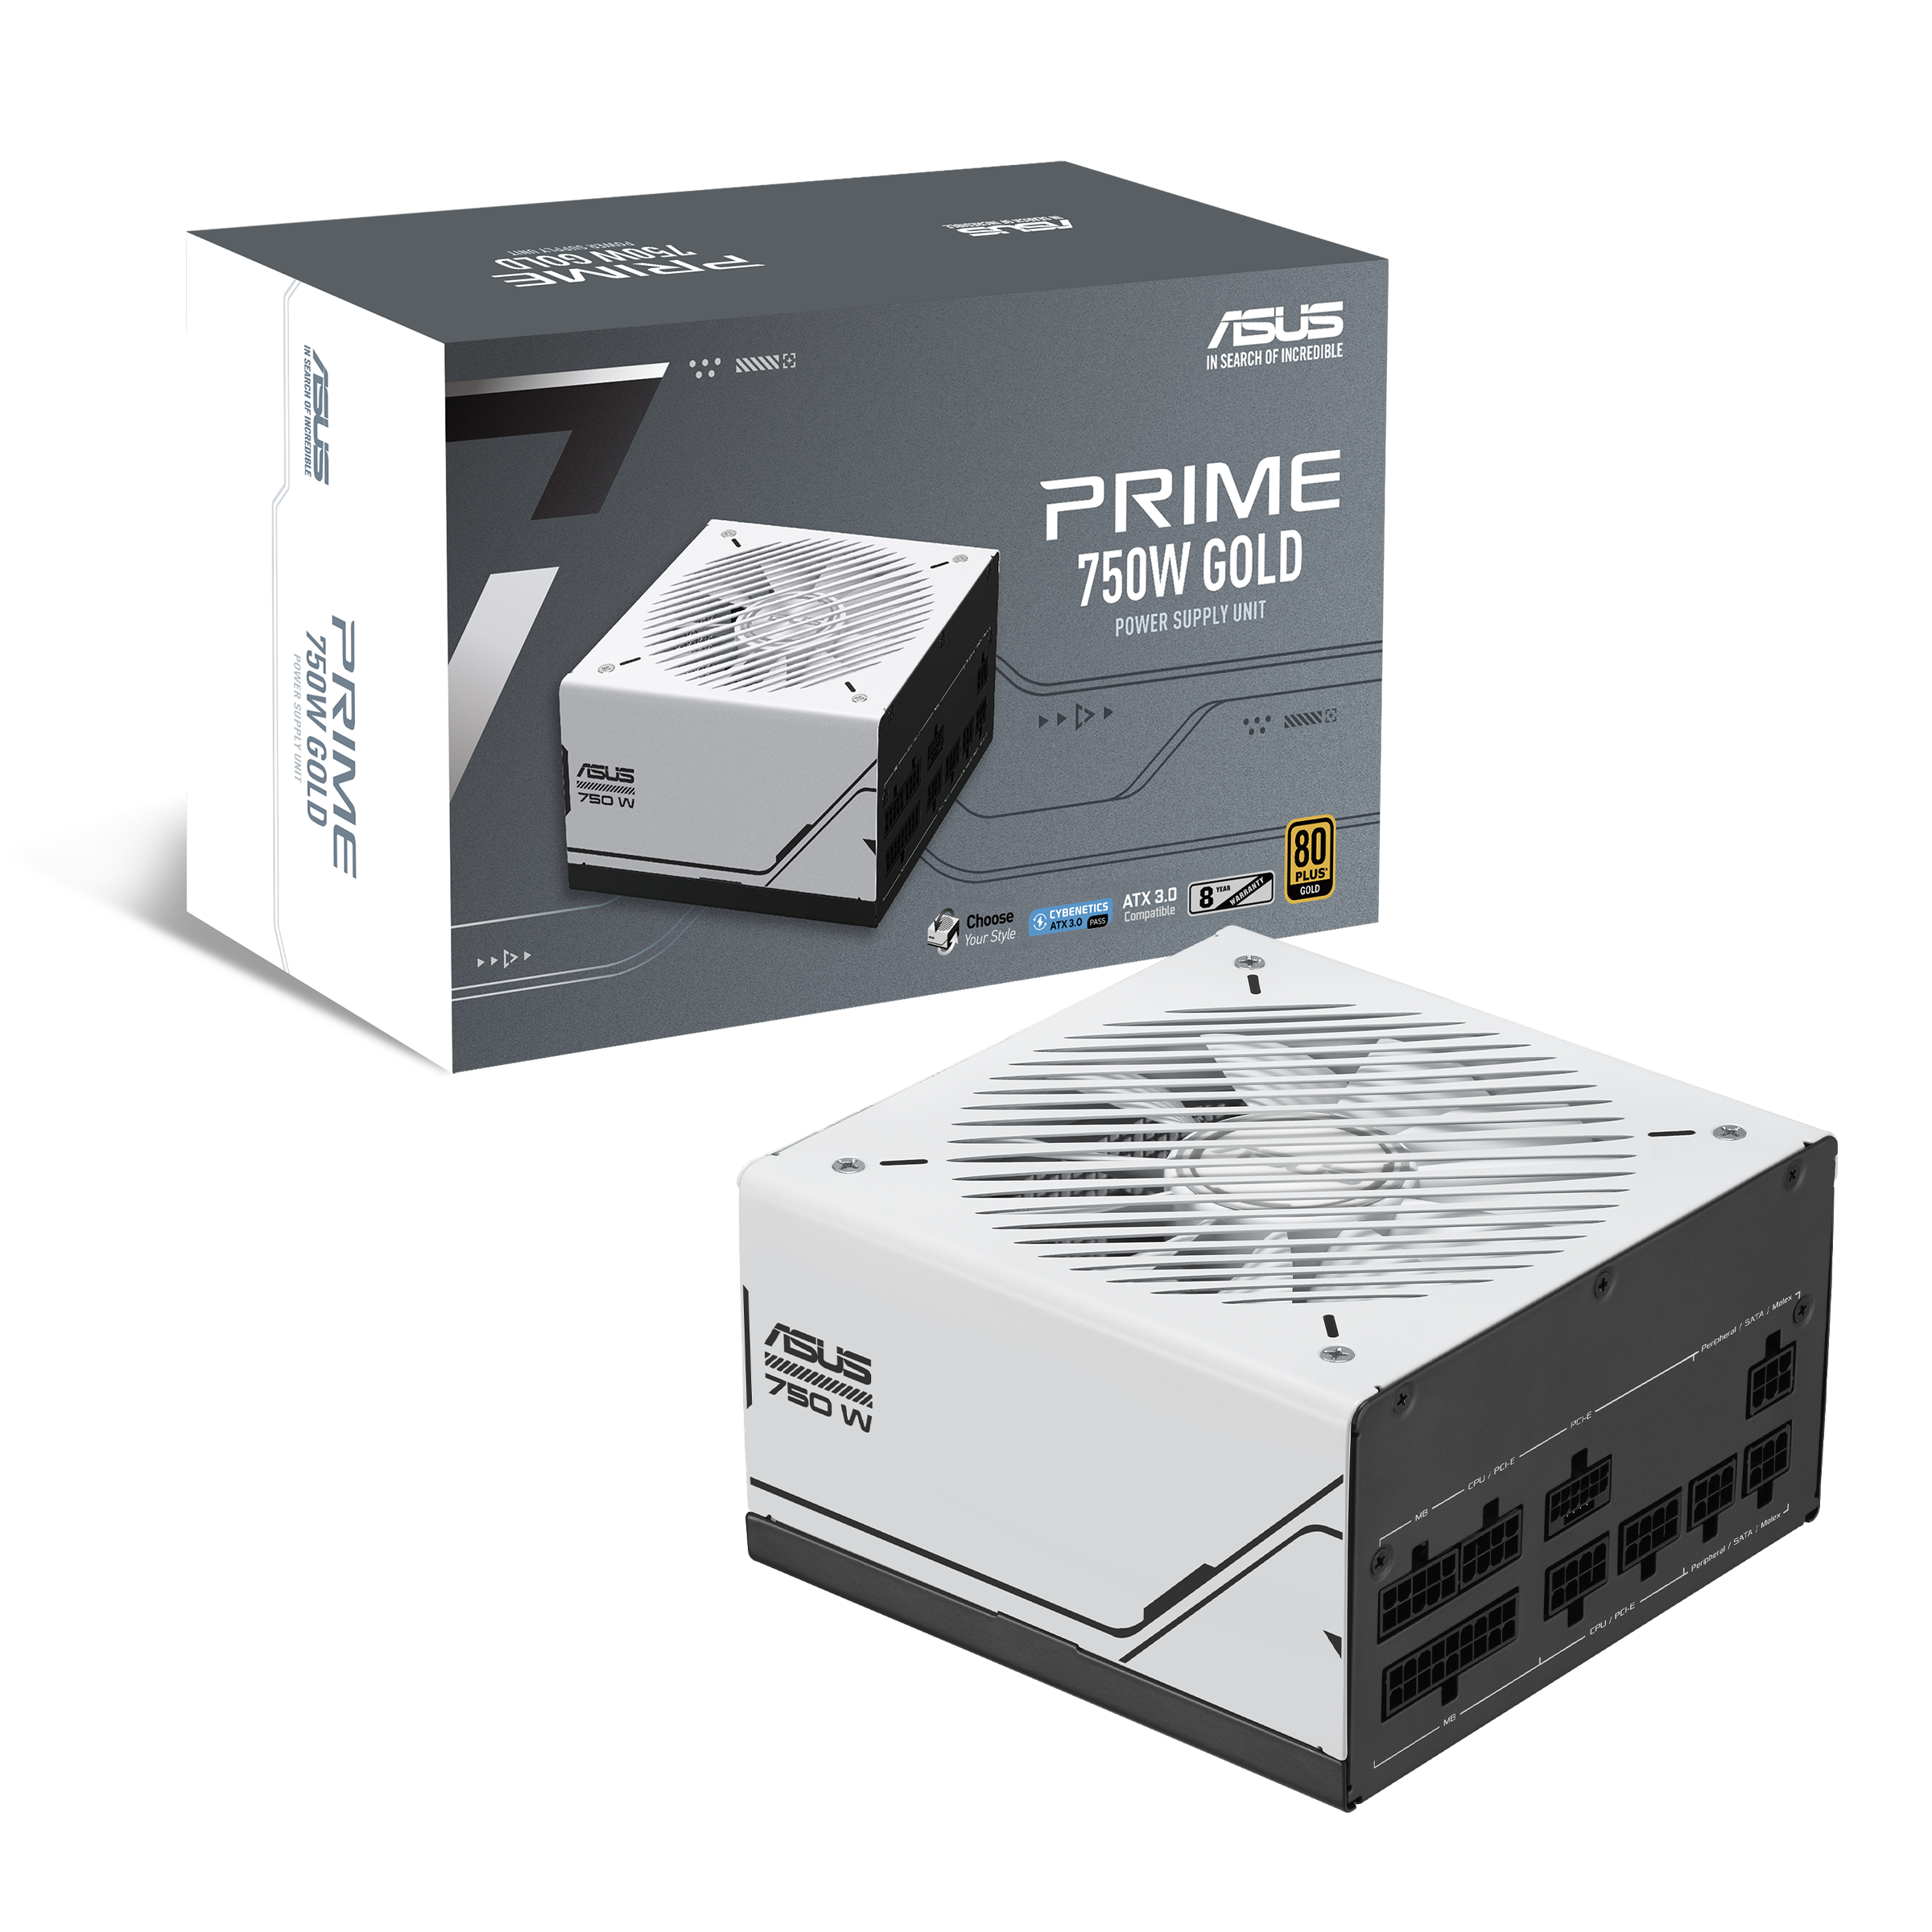 ASUS Prime 750W Gold, Power Supply Units